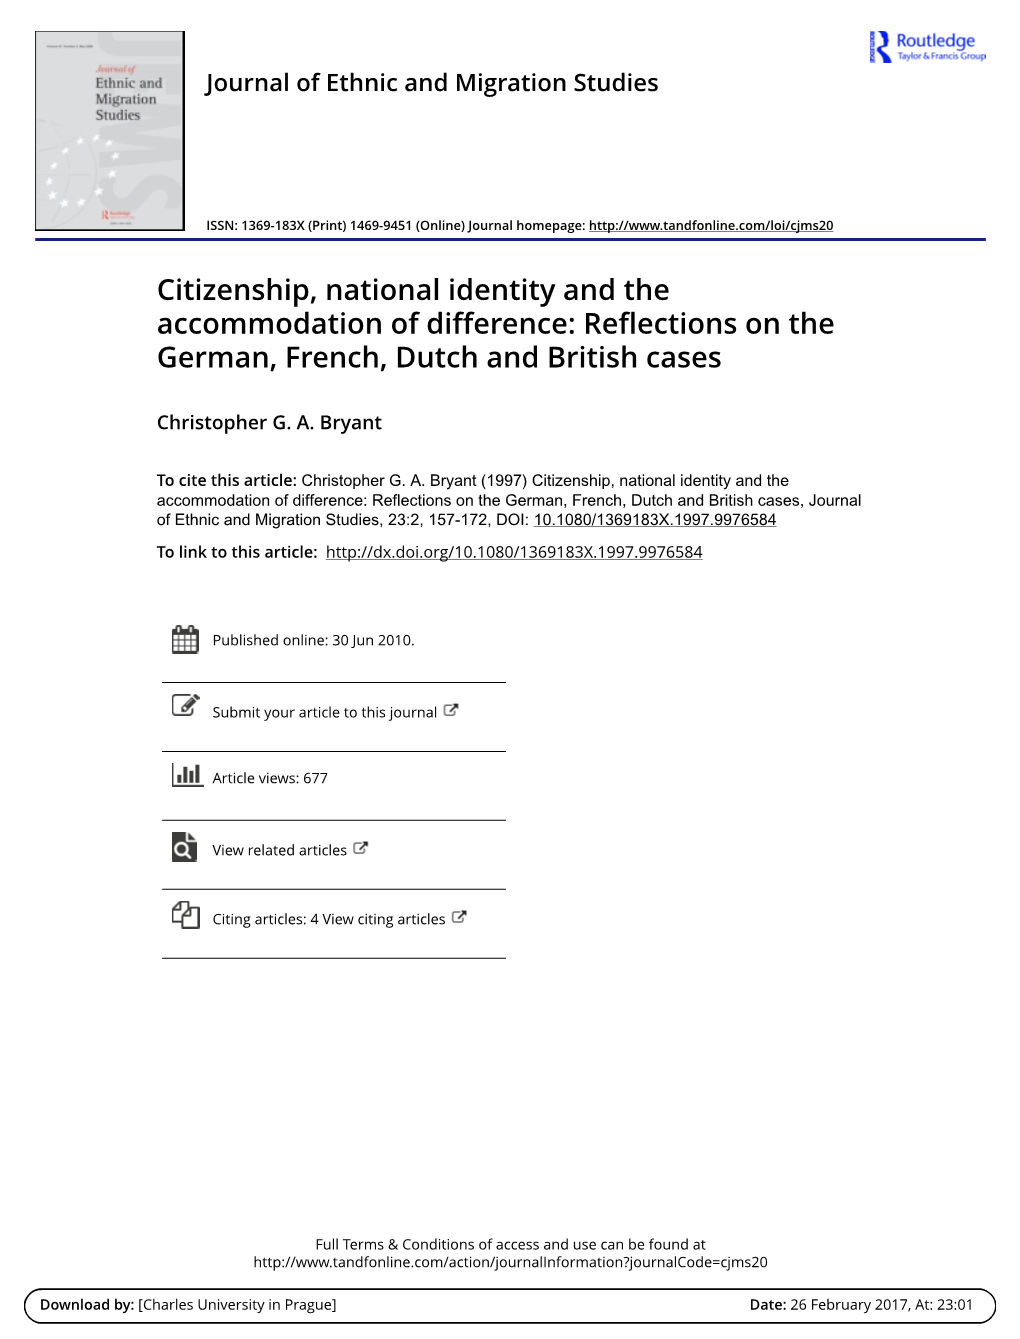 Citizenship, National Identity and the Accommodation of Difference: Reflections on the German, French, Dutch and British Cases